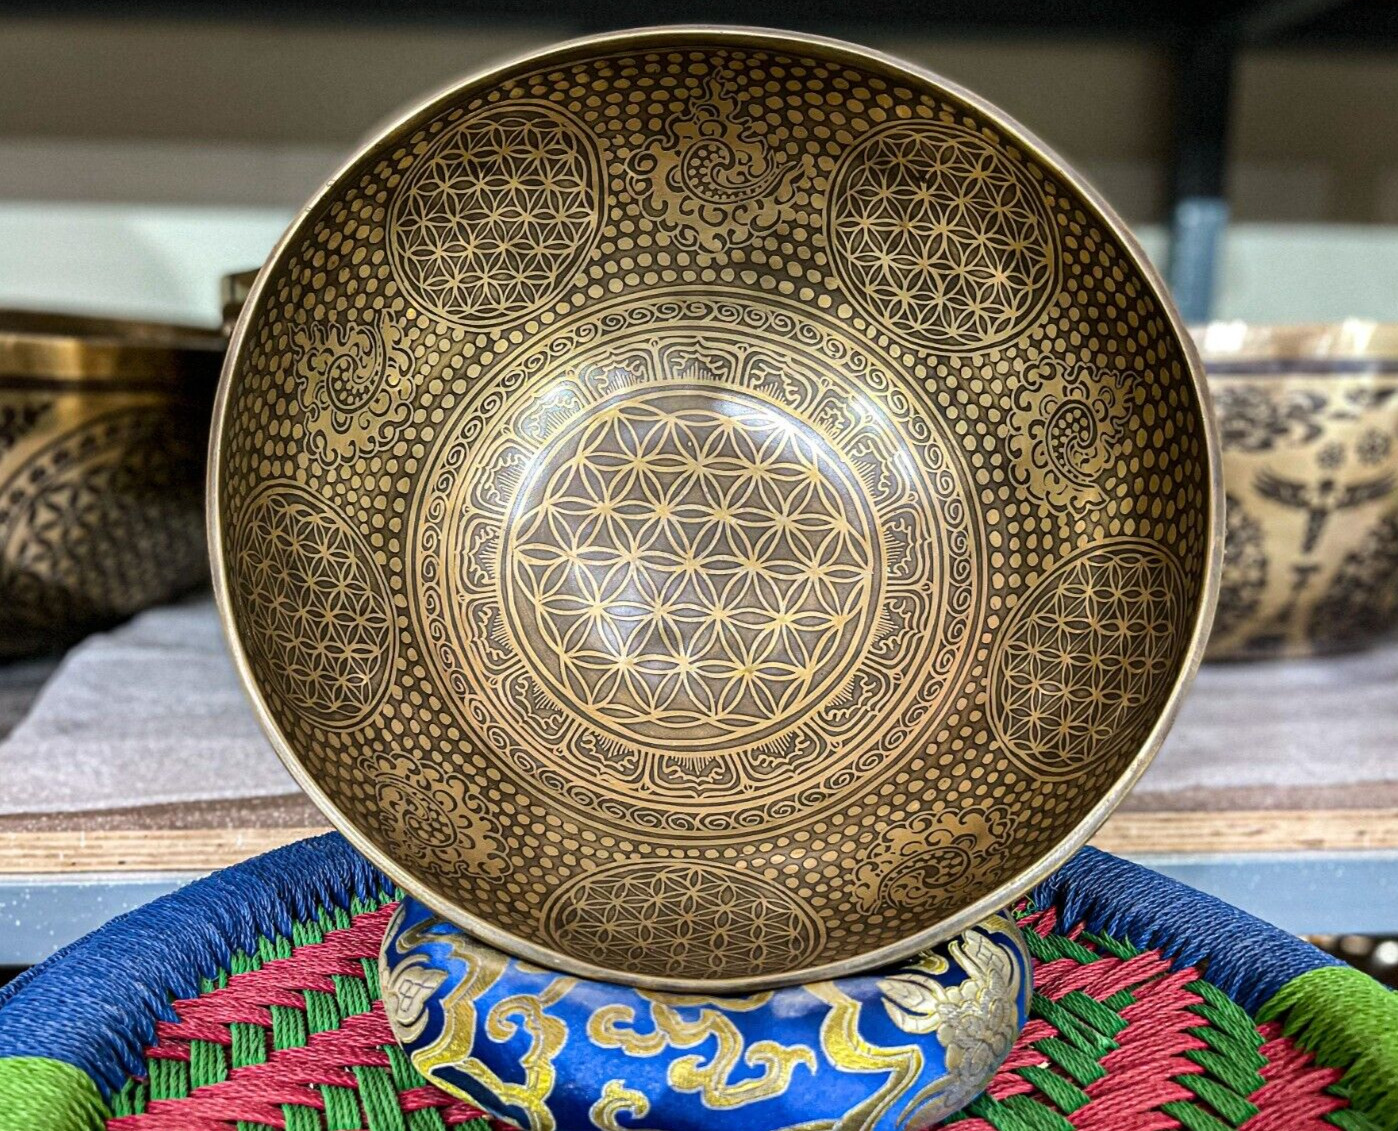 SALE 10 inches Special Flower of Life Carving Spiritual singing bowl from Nepal